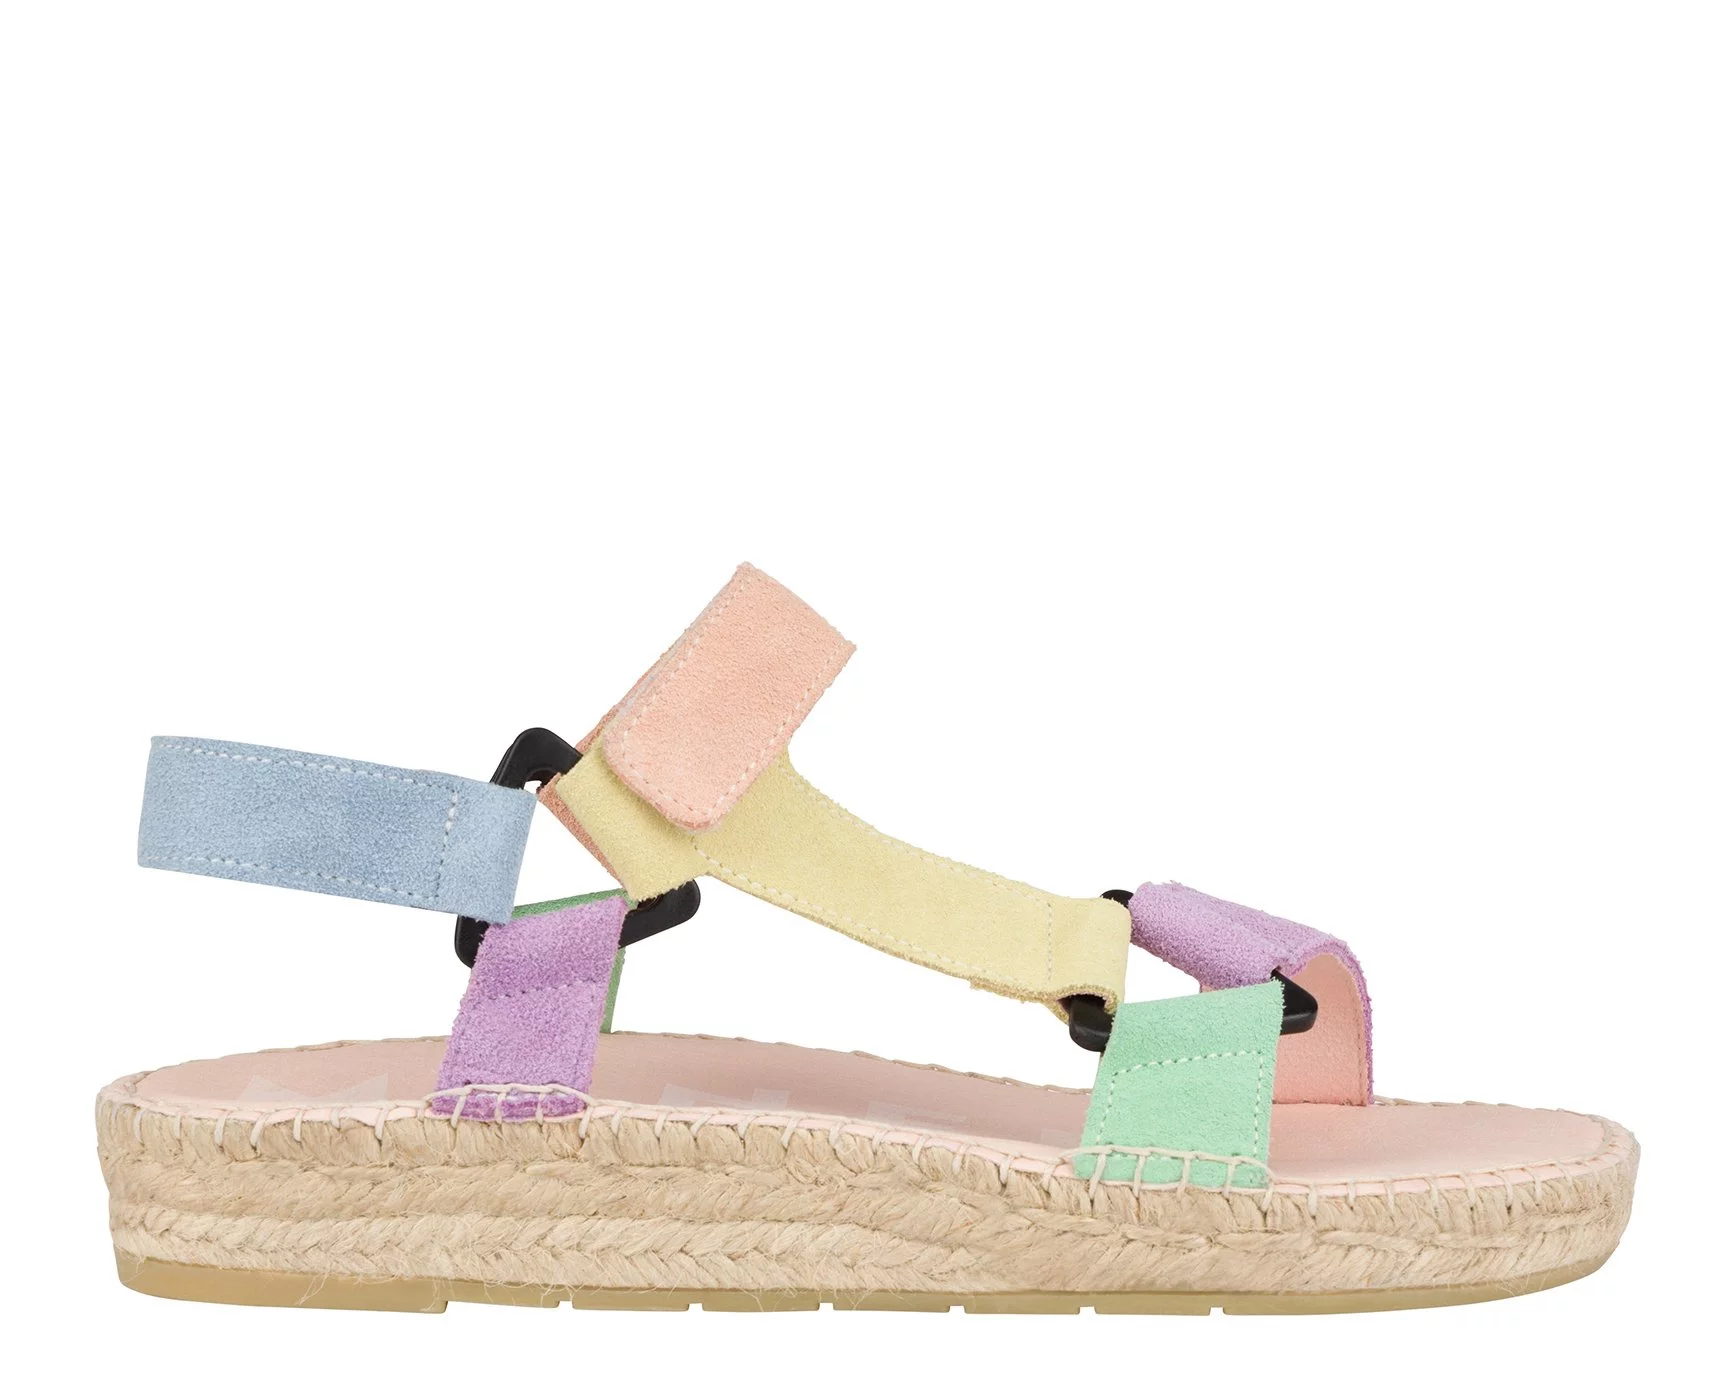 G2.1JH_Hiking_Sandals_Venice_Suede_Yellow_Rose_Lilac_1_1732x1389